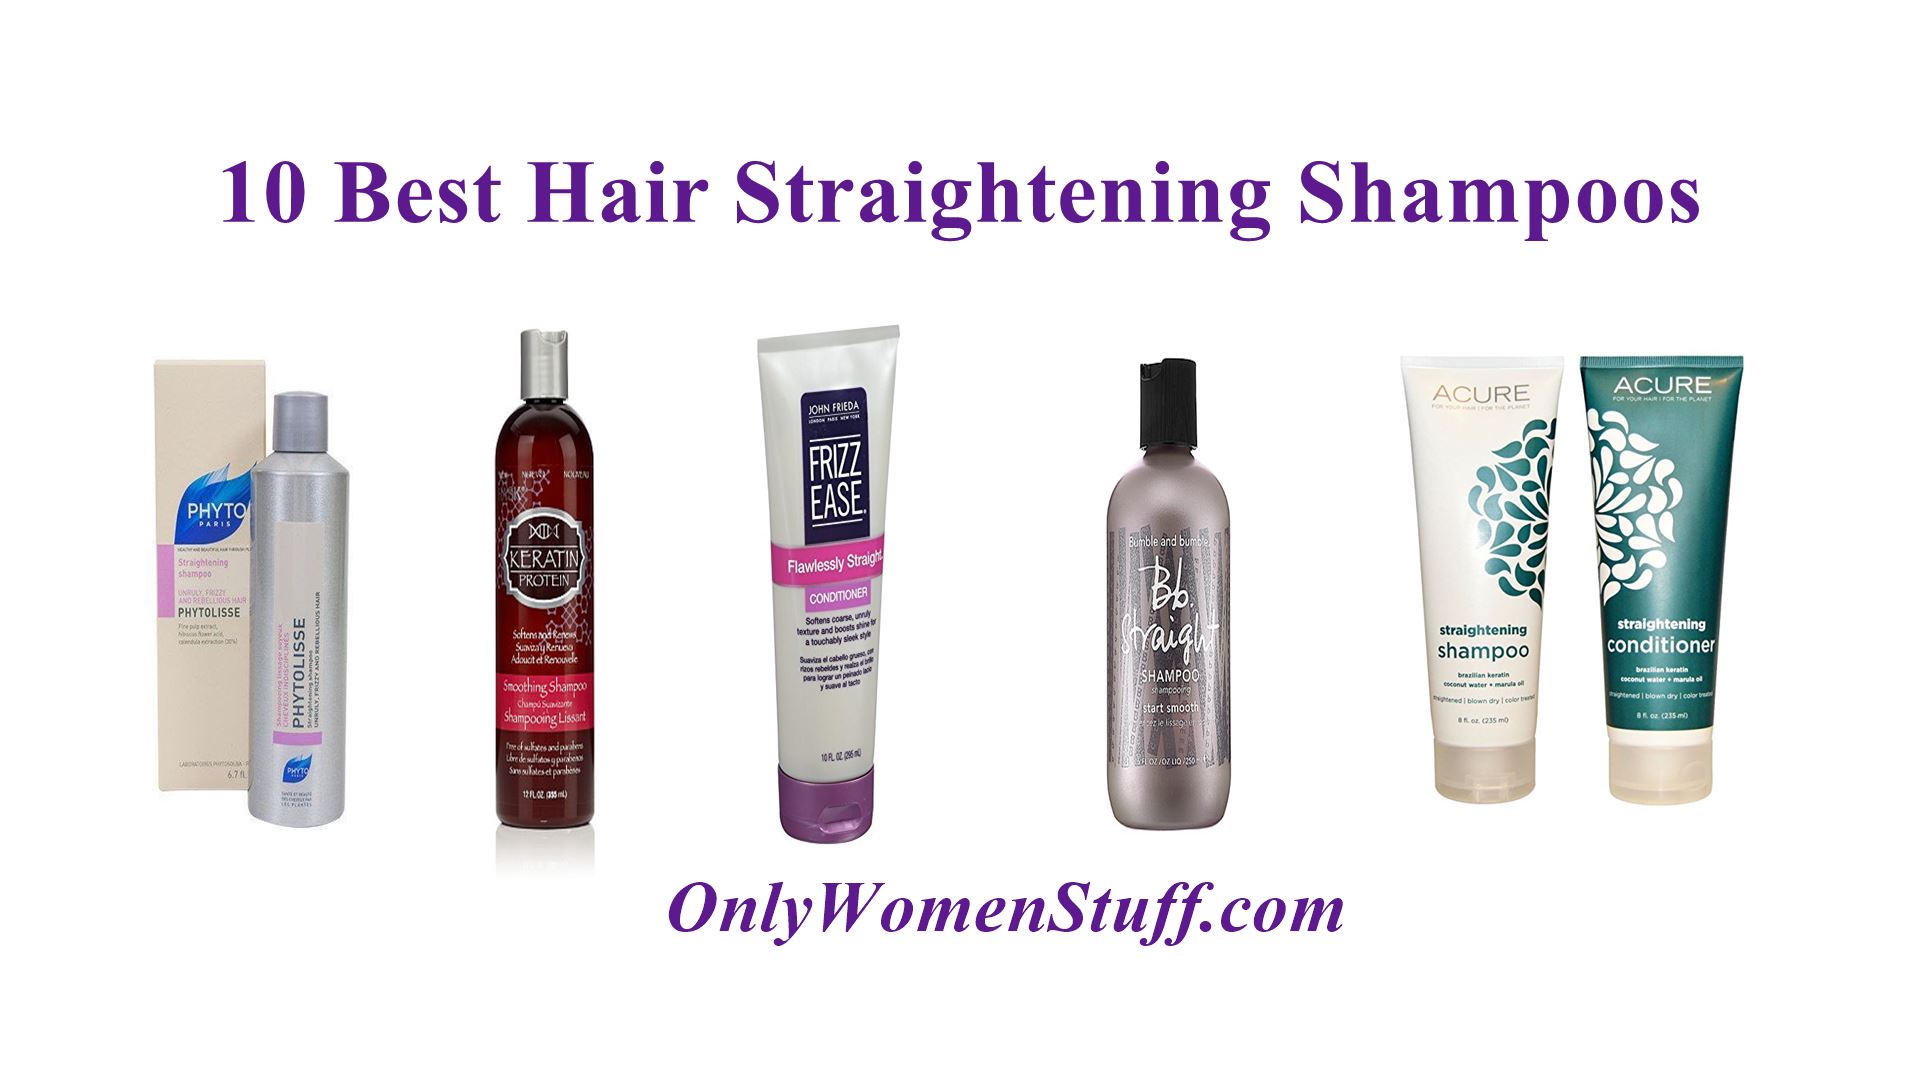 10 Best Hair Straightening Shampoos for Curly & Rough Hair